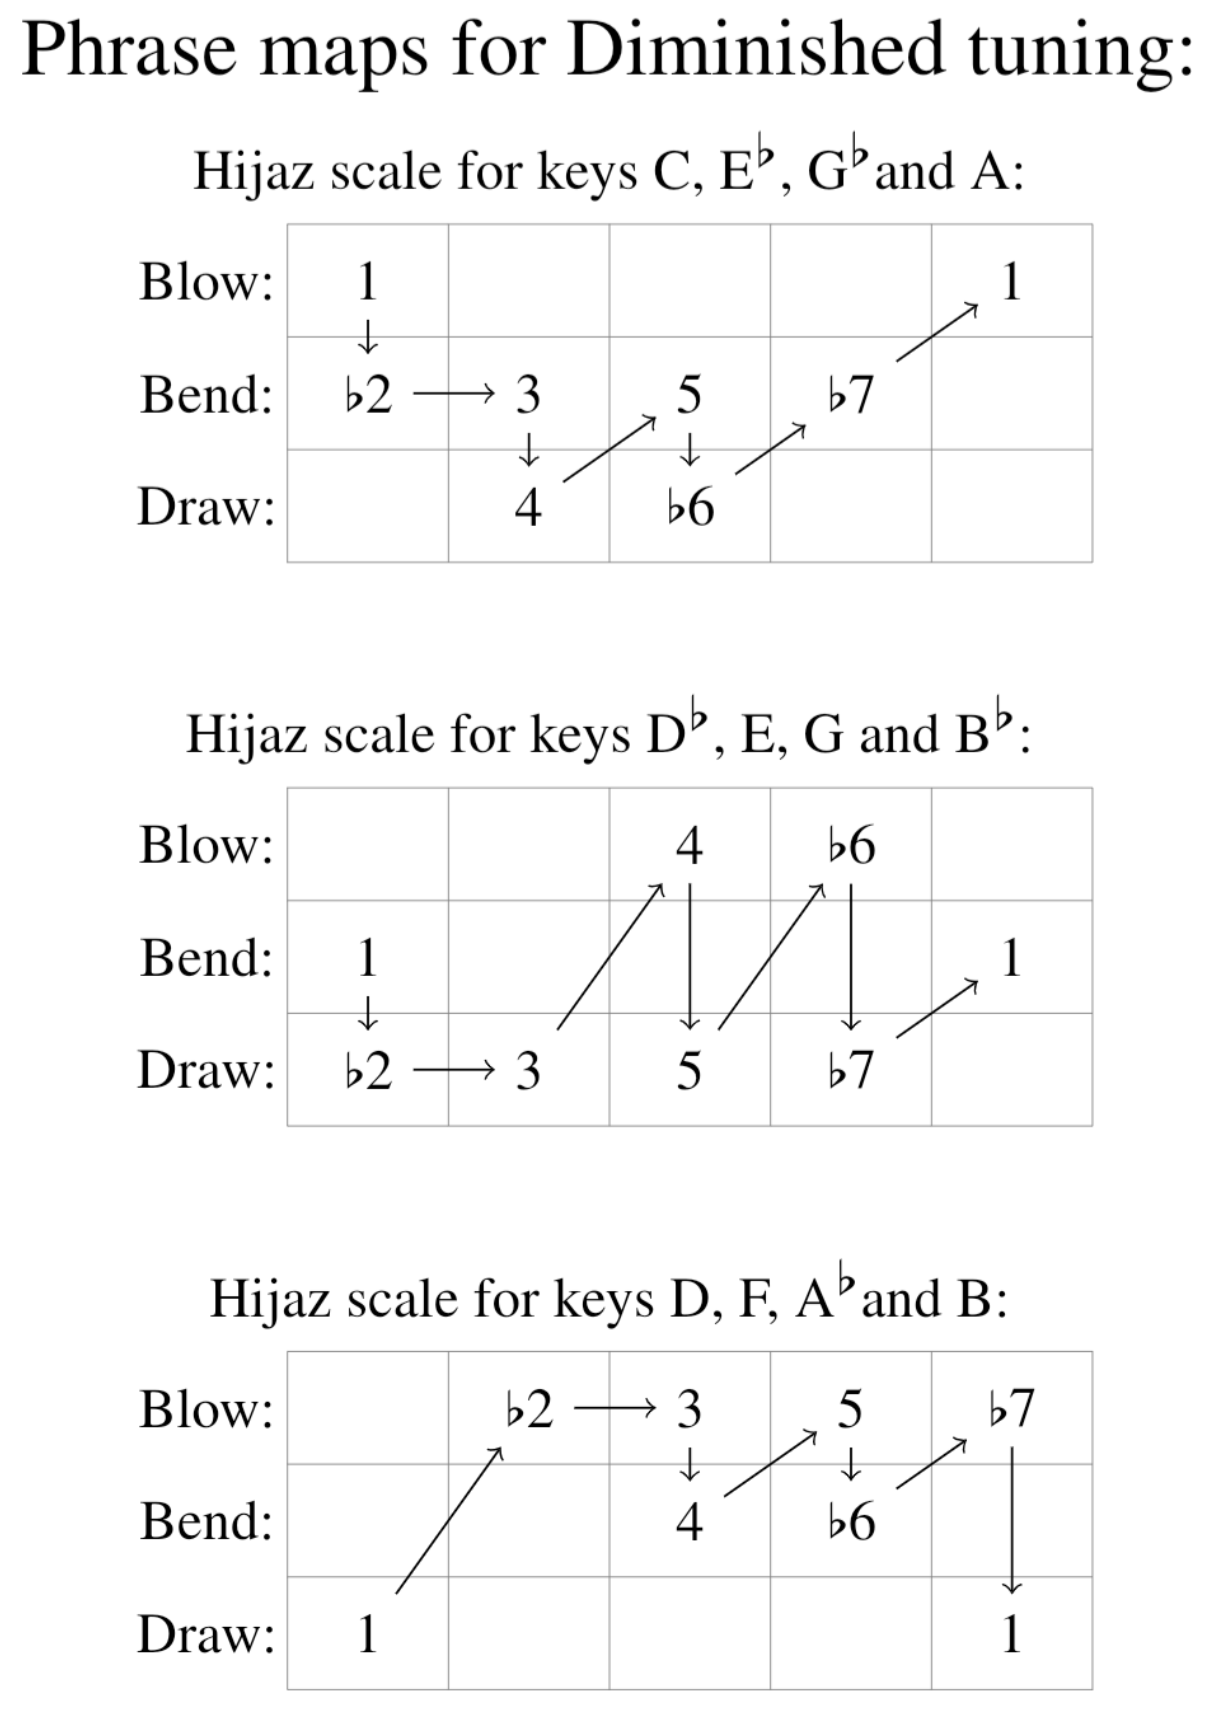 Lucky 13 Diminished Tuning - Hijaz Scale Patterns - Blow on Top.png